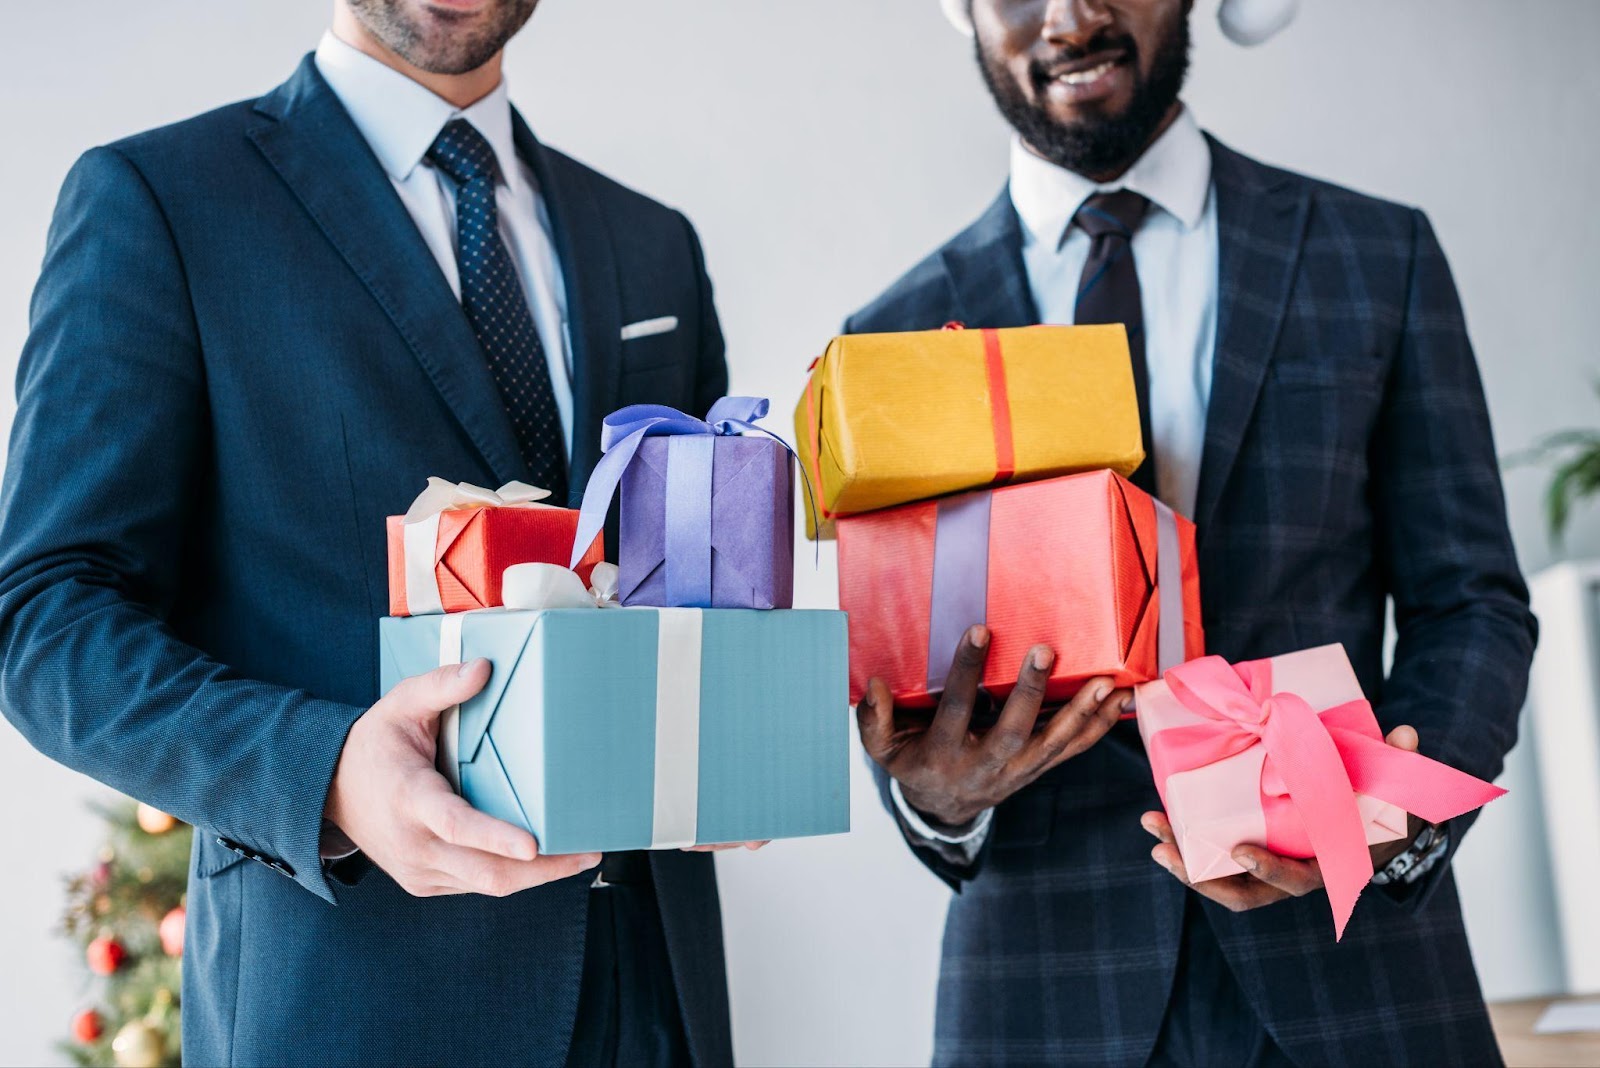 Company Swag Curated Gift Boxes for New Hires - Exclusively with Love